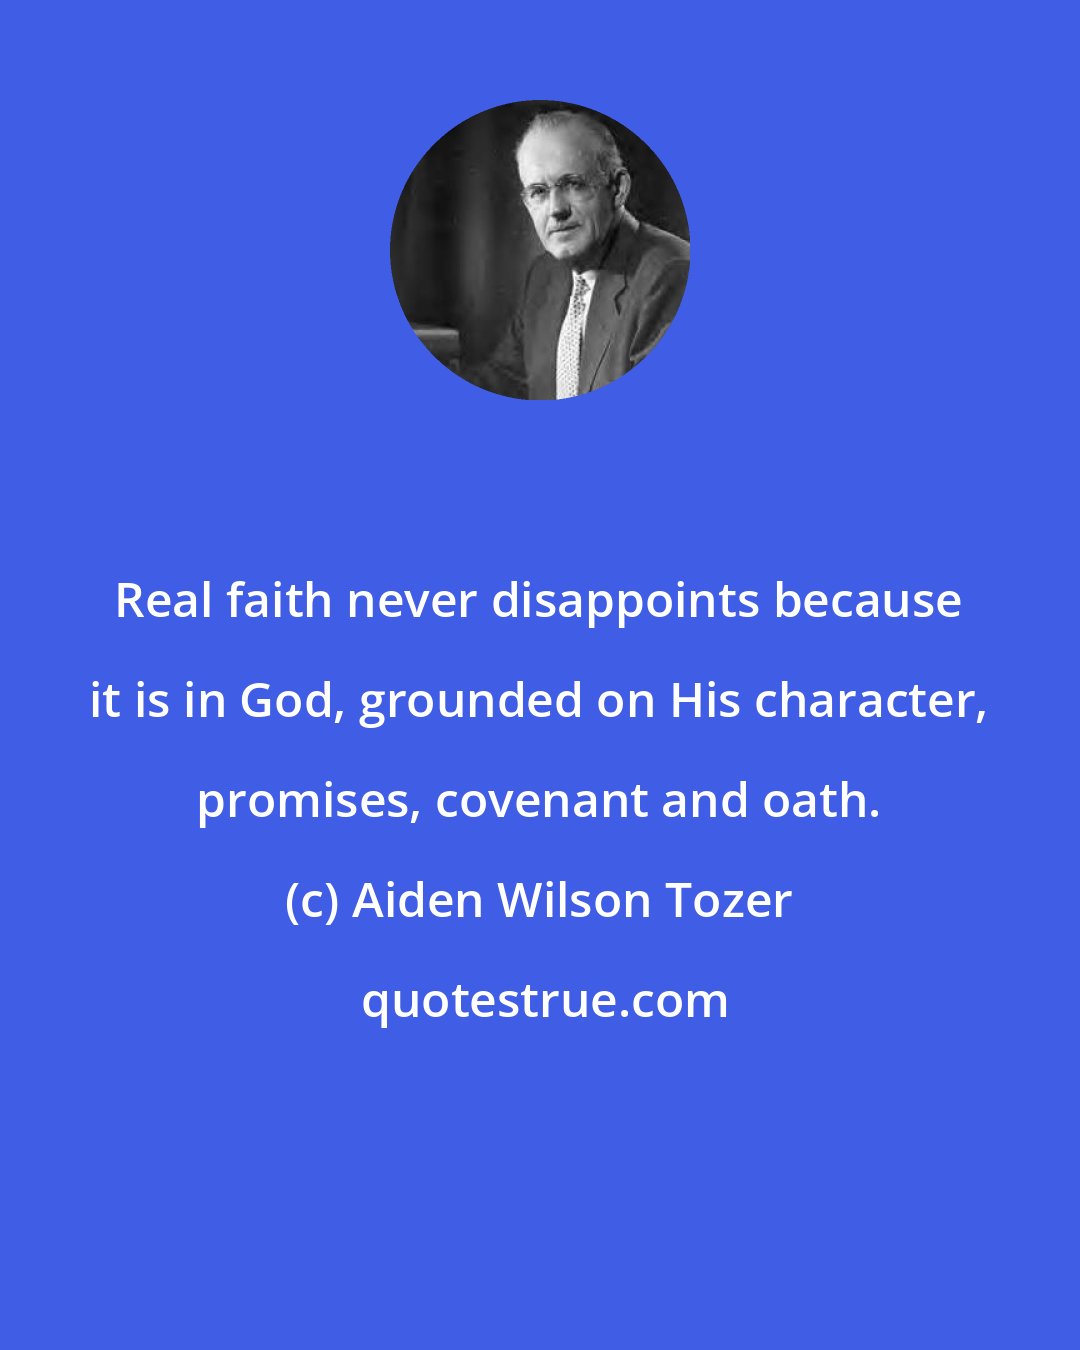 Aiden Wilson Tozer: Real faith never disappoints because it is in God, grounded on His character, promises, covenant and oath.